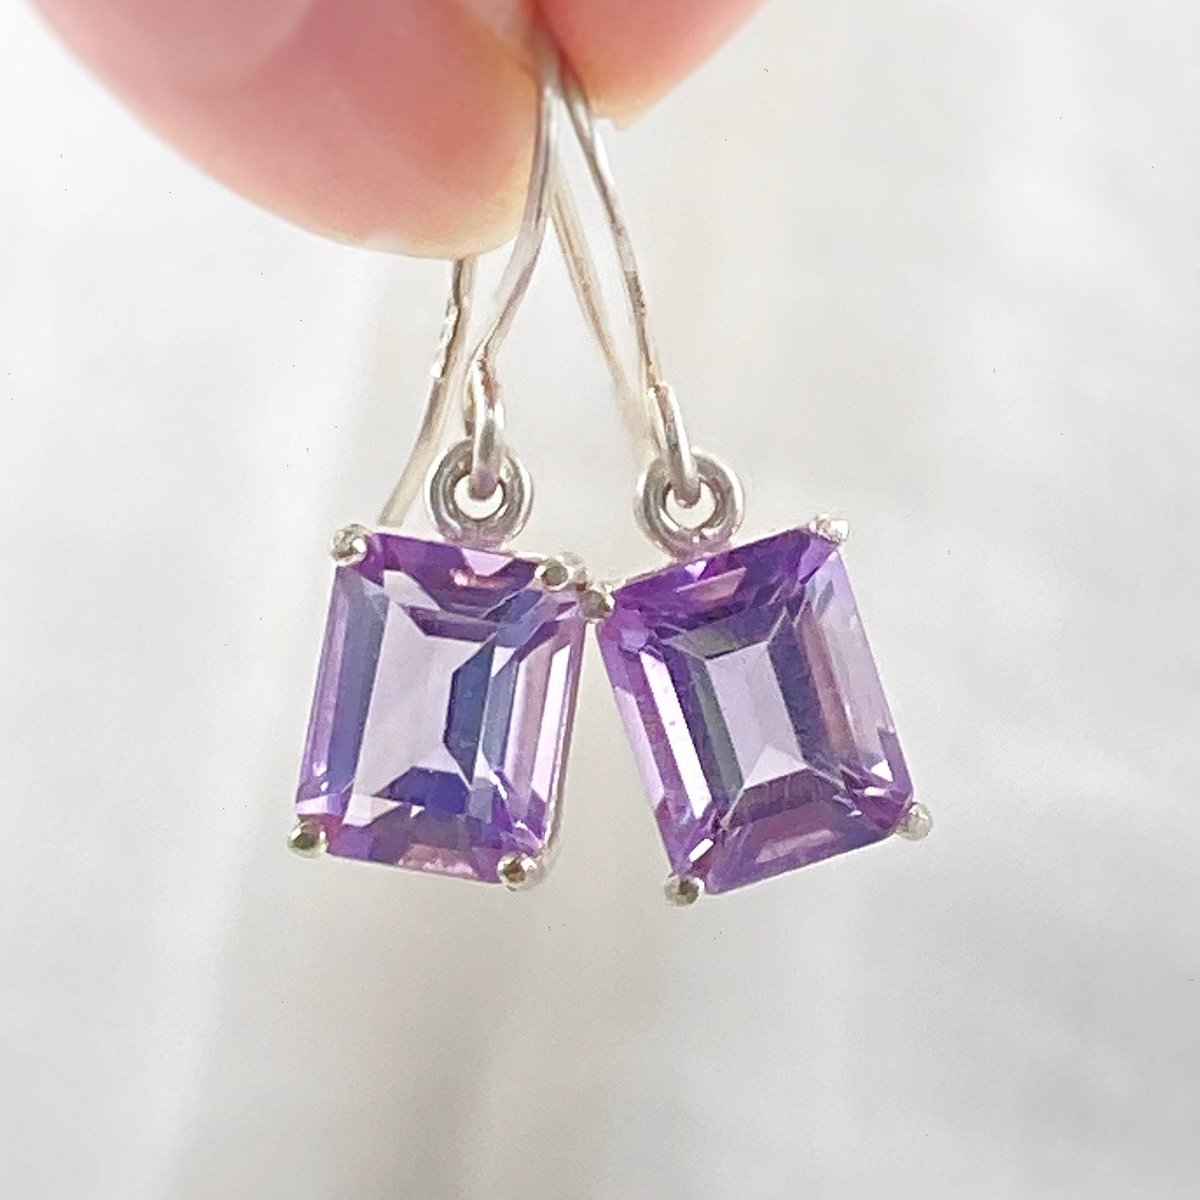 Gorgeous ~4.5 ctw #AmethystEarrings from #MariesGems shop on #Etsy. Lavender color, emerald cut amethysts in #SterlingSilver. Save 15% + get free shipping with $35+. #GenuineAmethyst #FebruaryBirthstone 
etsy.me/3qxVso6